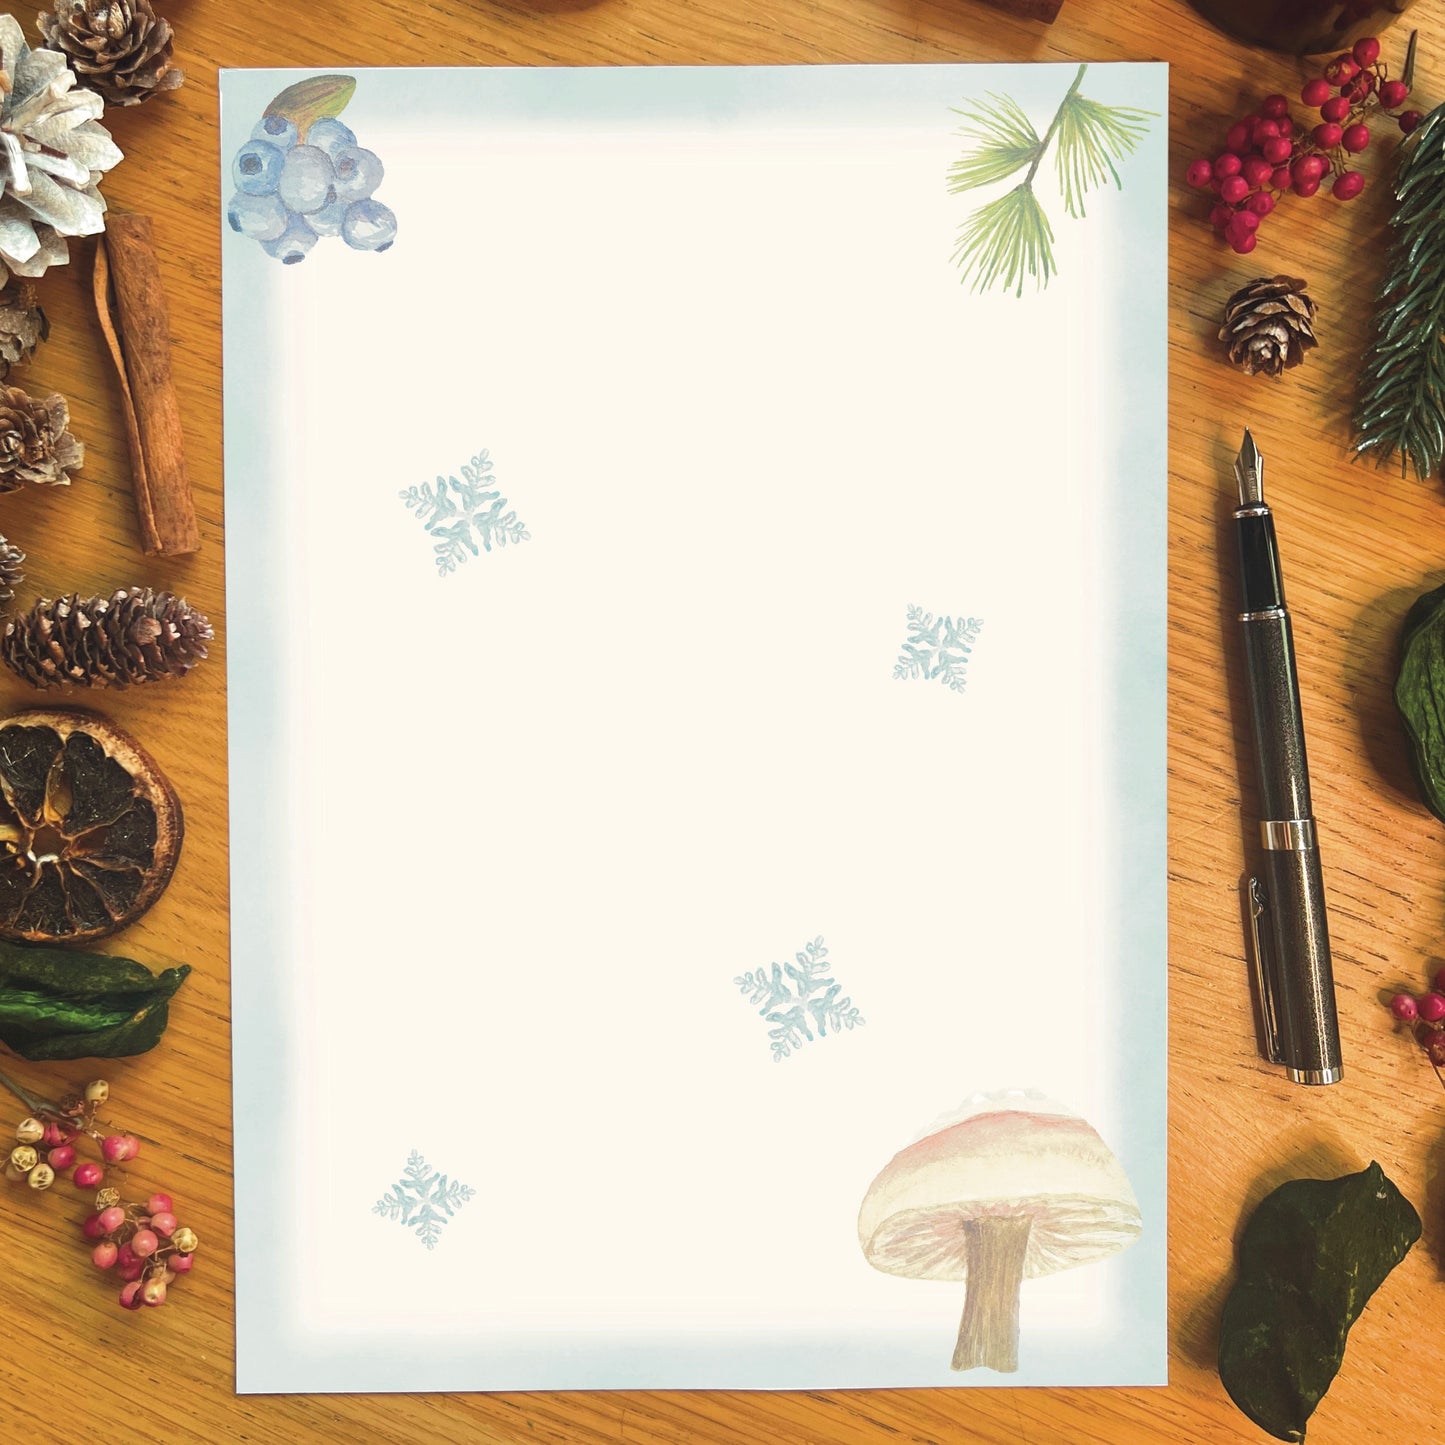 Winter wanderland illustrated paper featuring a snowy milkcap mushroom with an ice blue border and snowflakes across the page, on a wooden desk